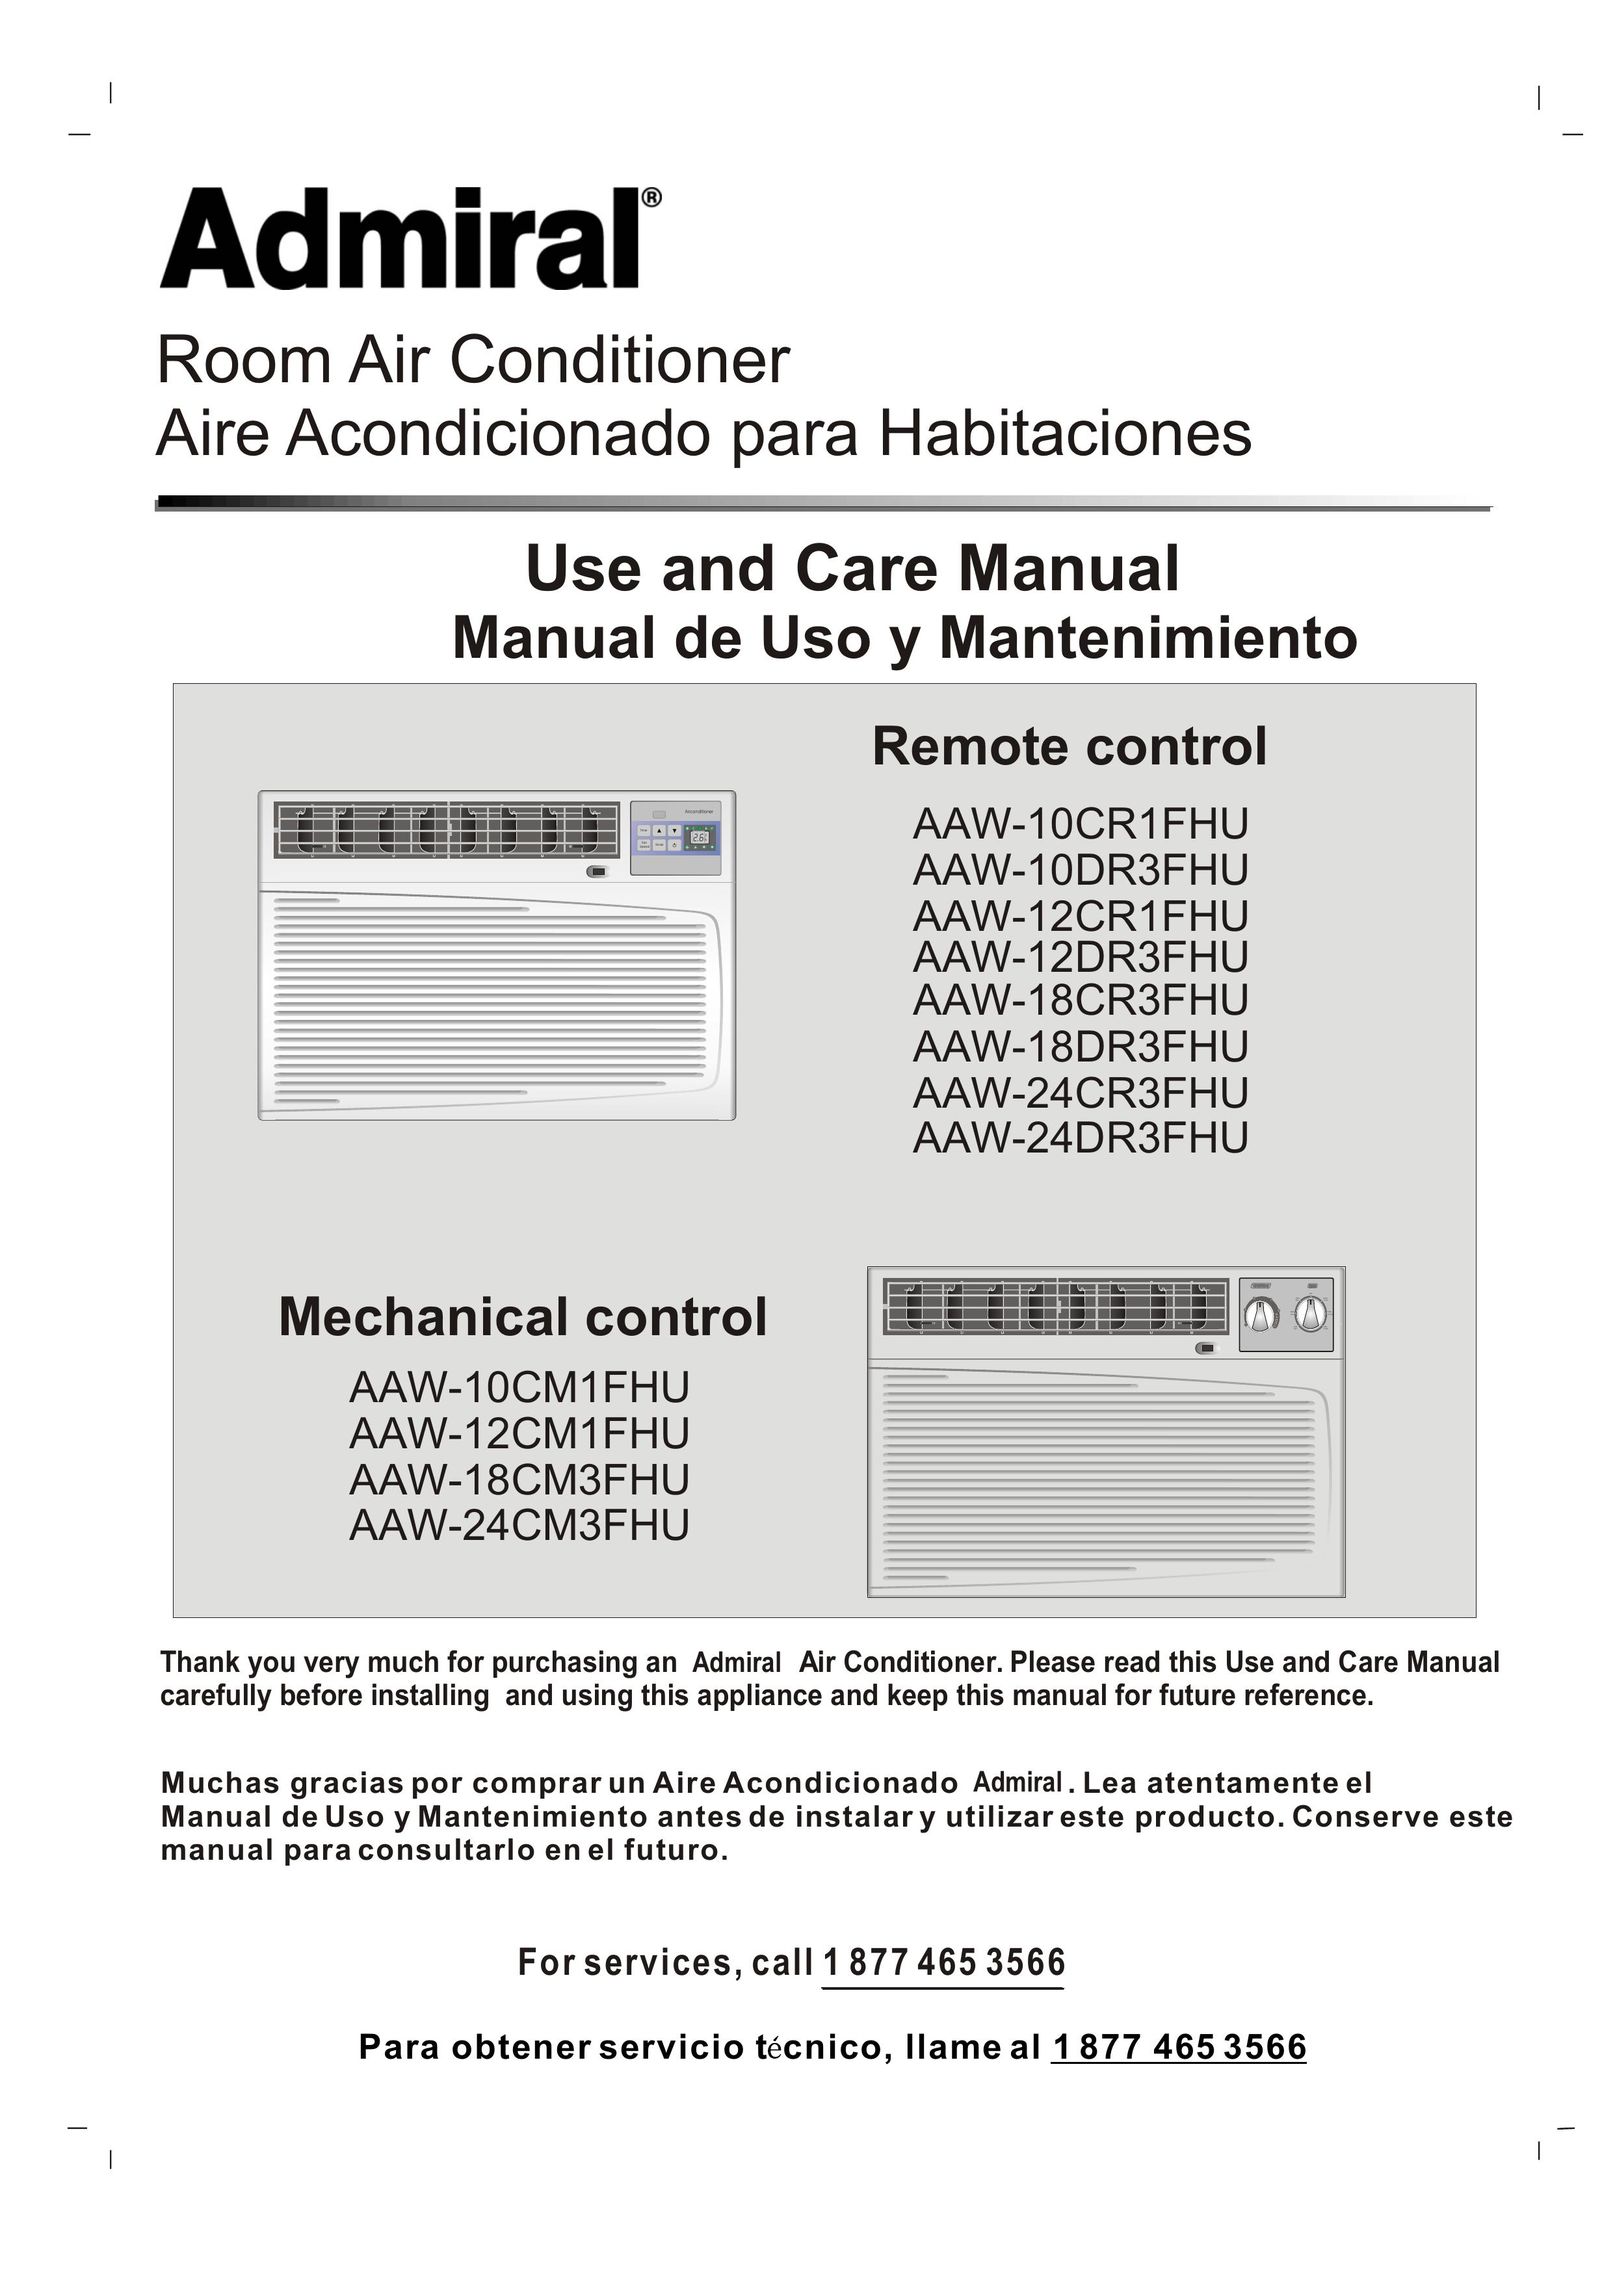 Admiral AAW-10CR1FHU Air Conditioner User Manual (Page 1)